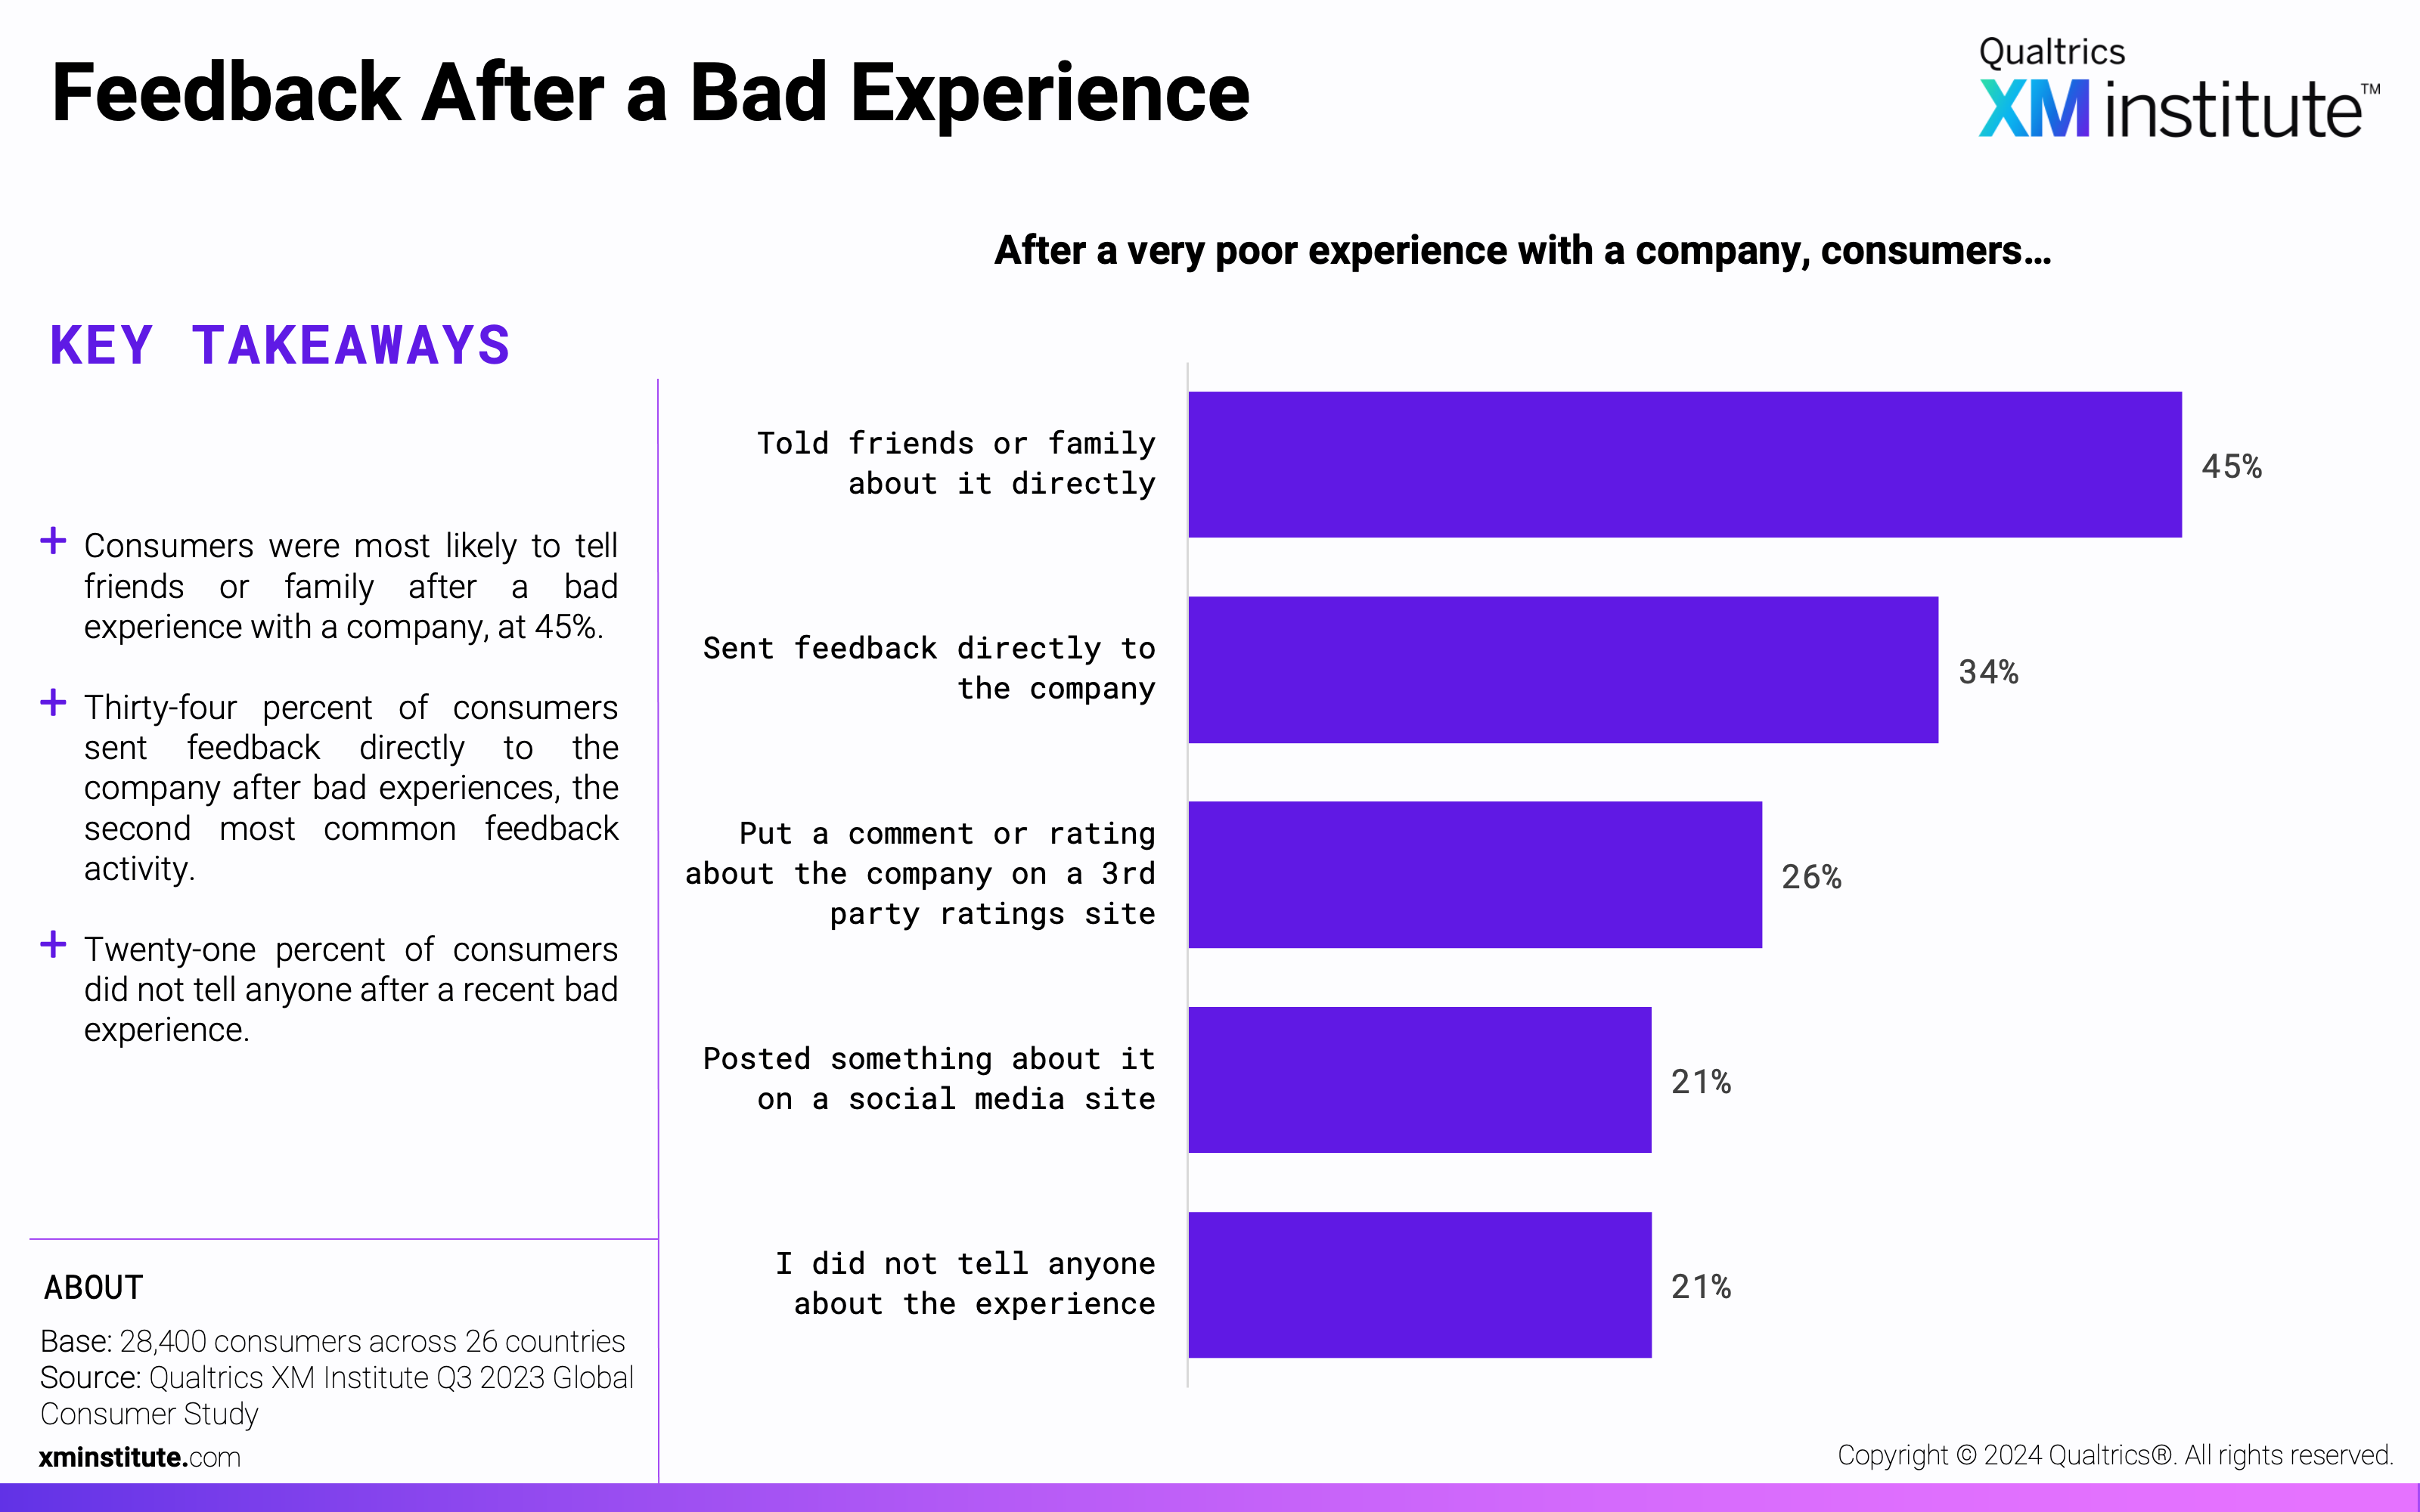 This chart shows the percentage of consumers that shared feedback through each method after a very bad experience with a company. 